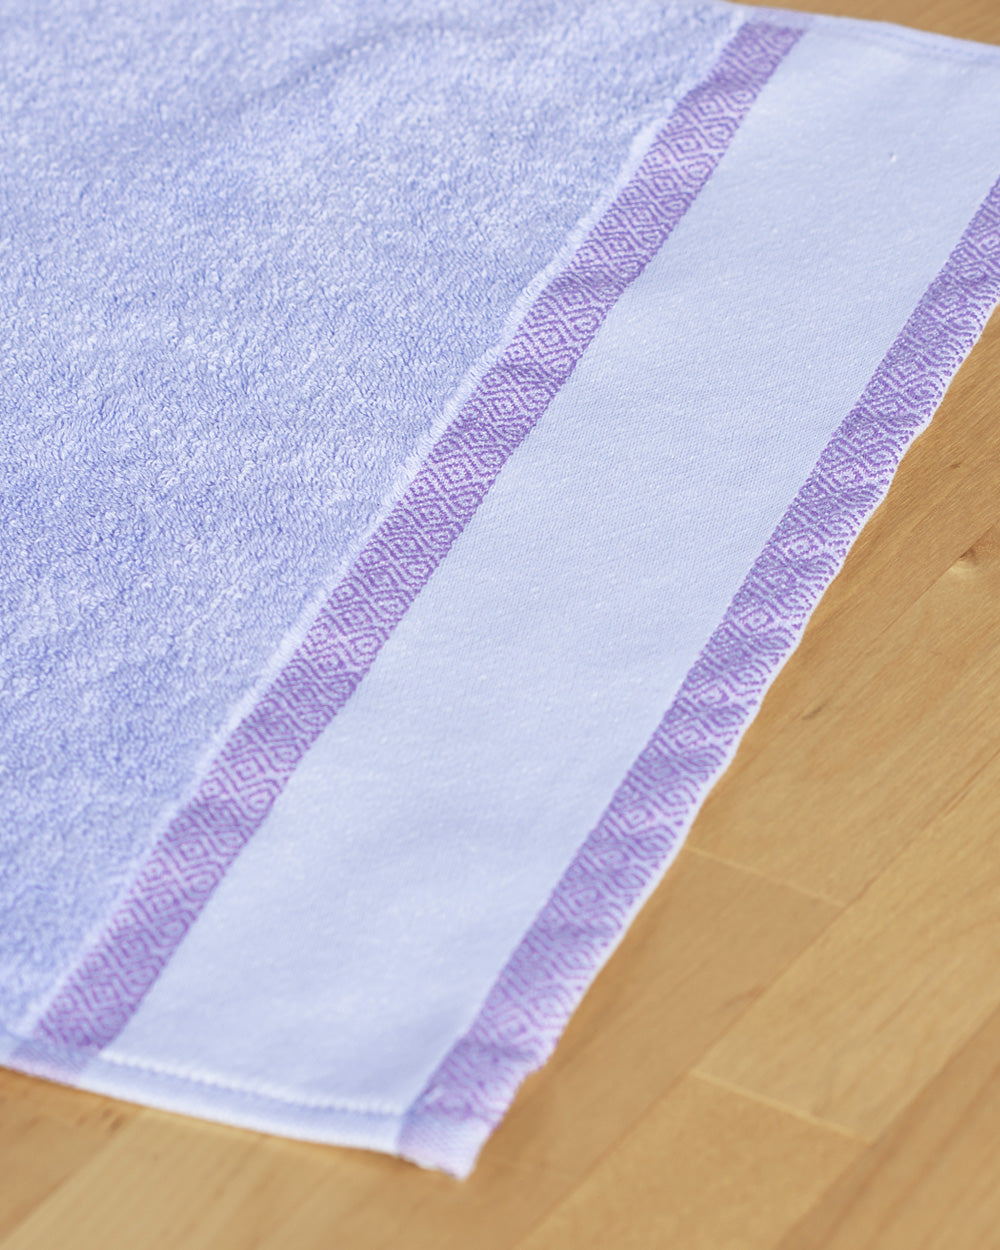 3D Grand Opening Purple Hand Towel (SIZE 16"X 32")